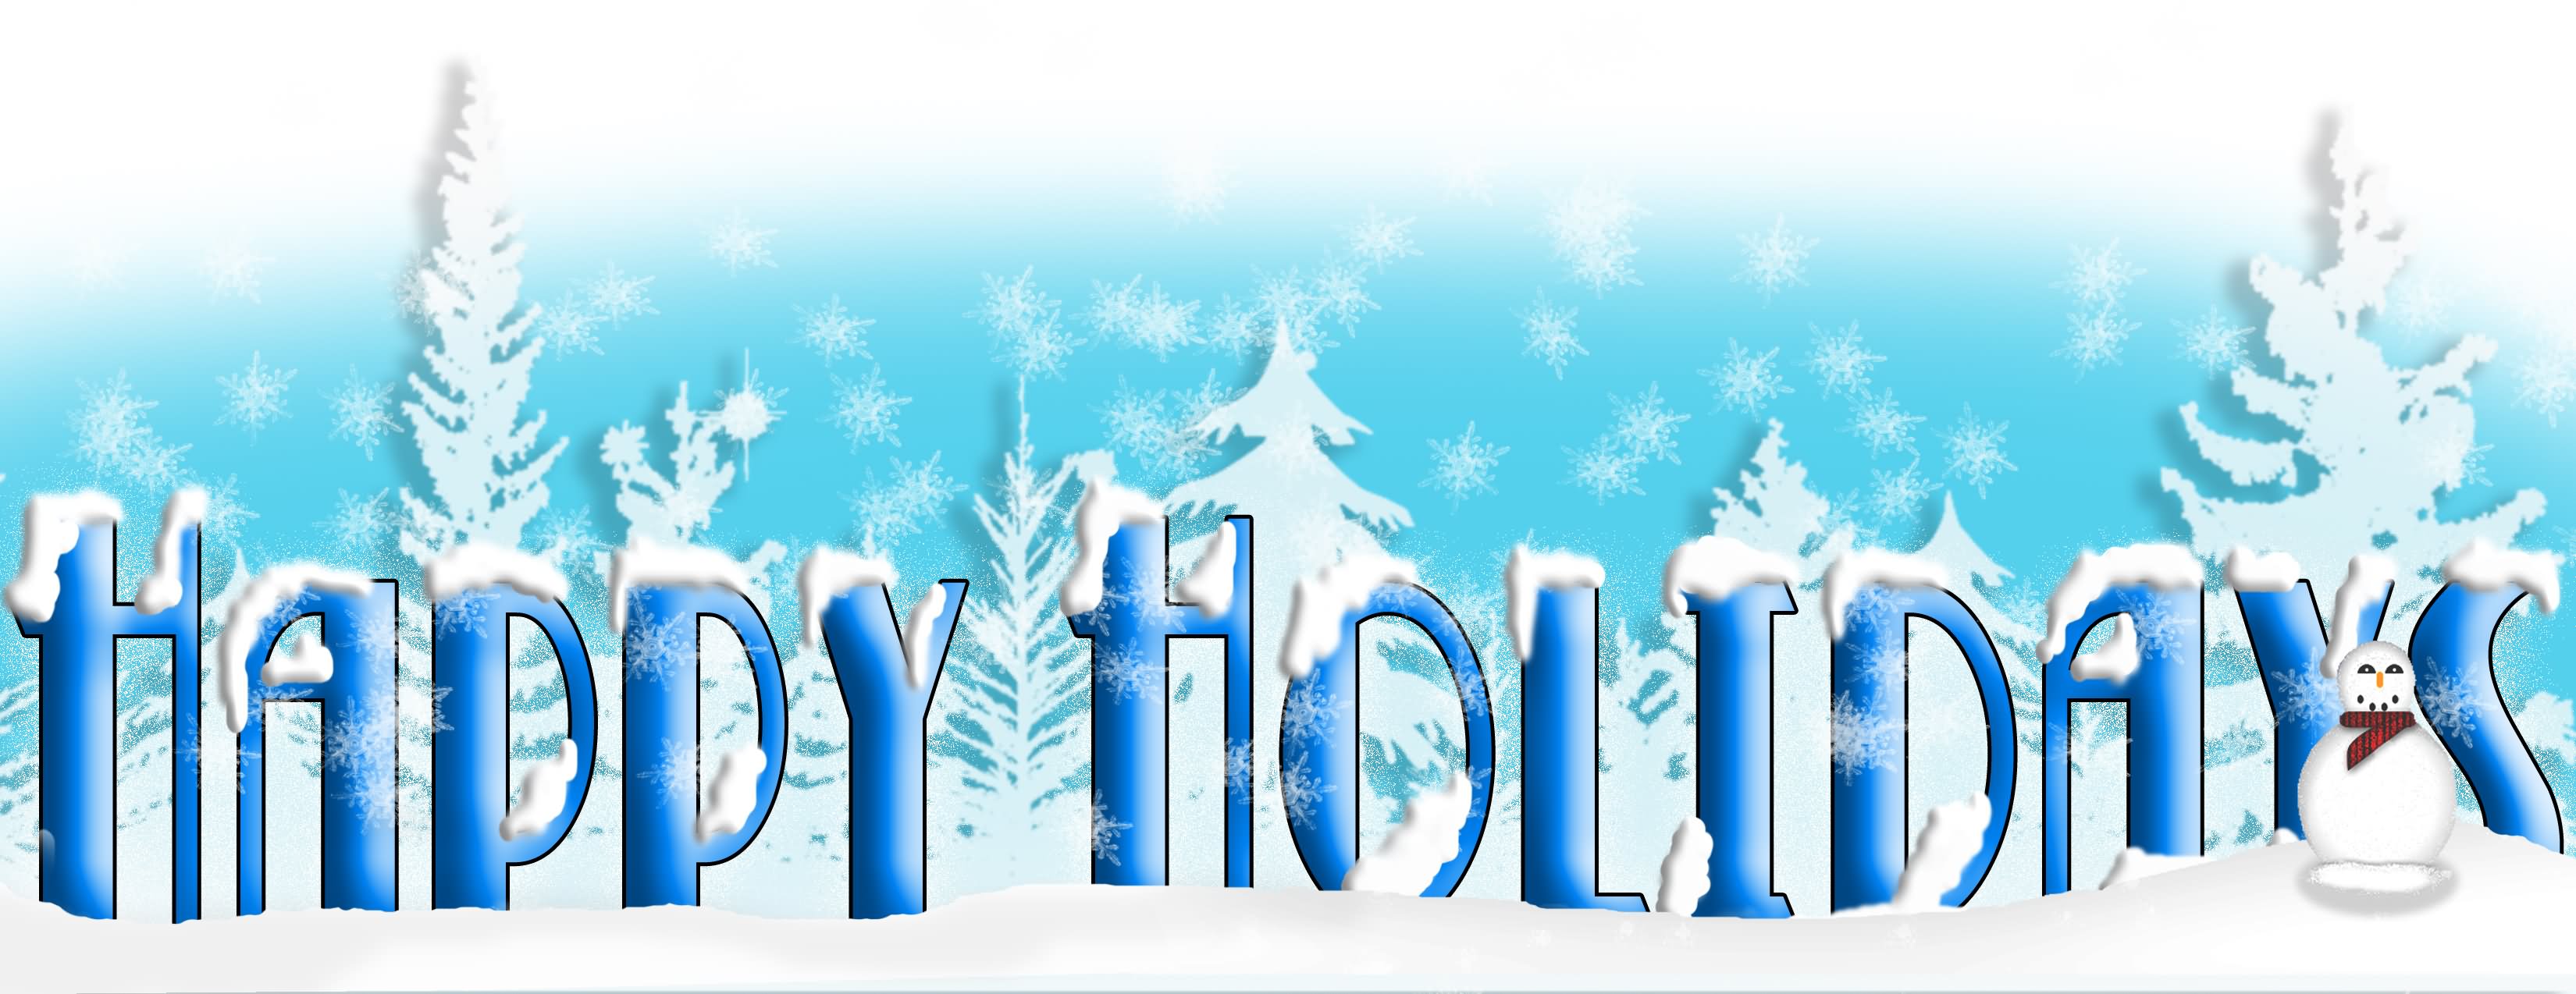 Happy Holidays Graphic Banner , HD Wallpaper & Backgrounds